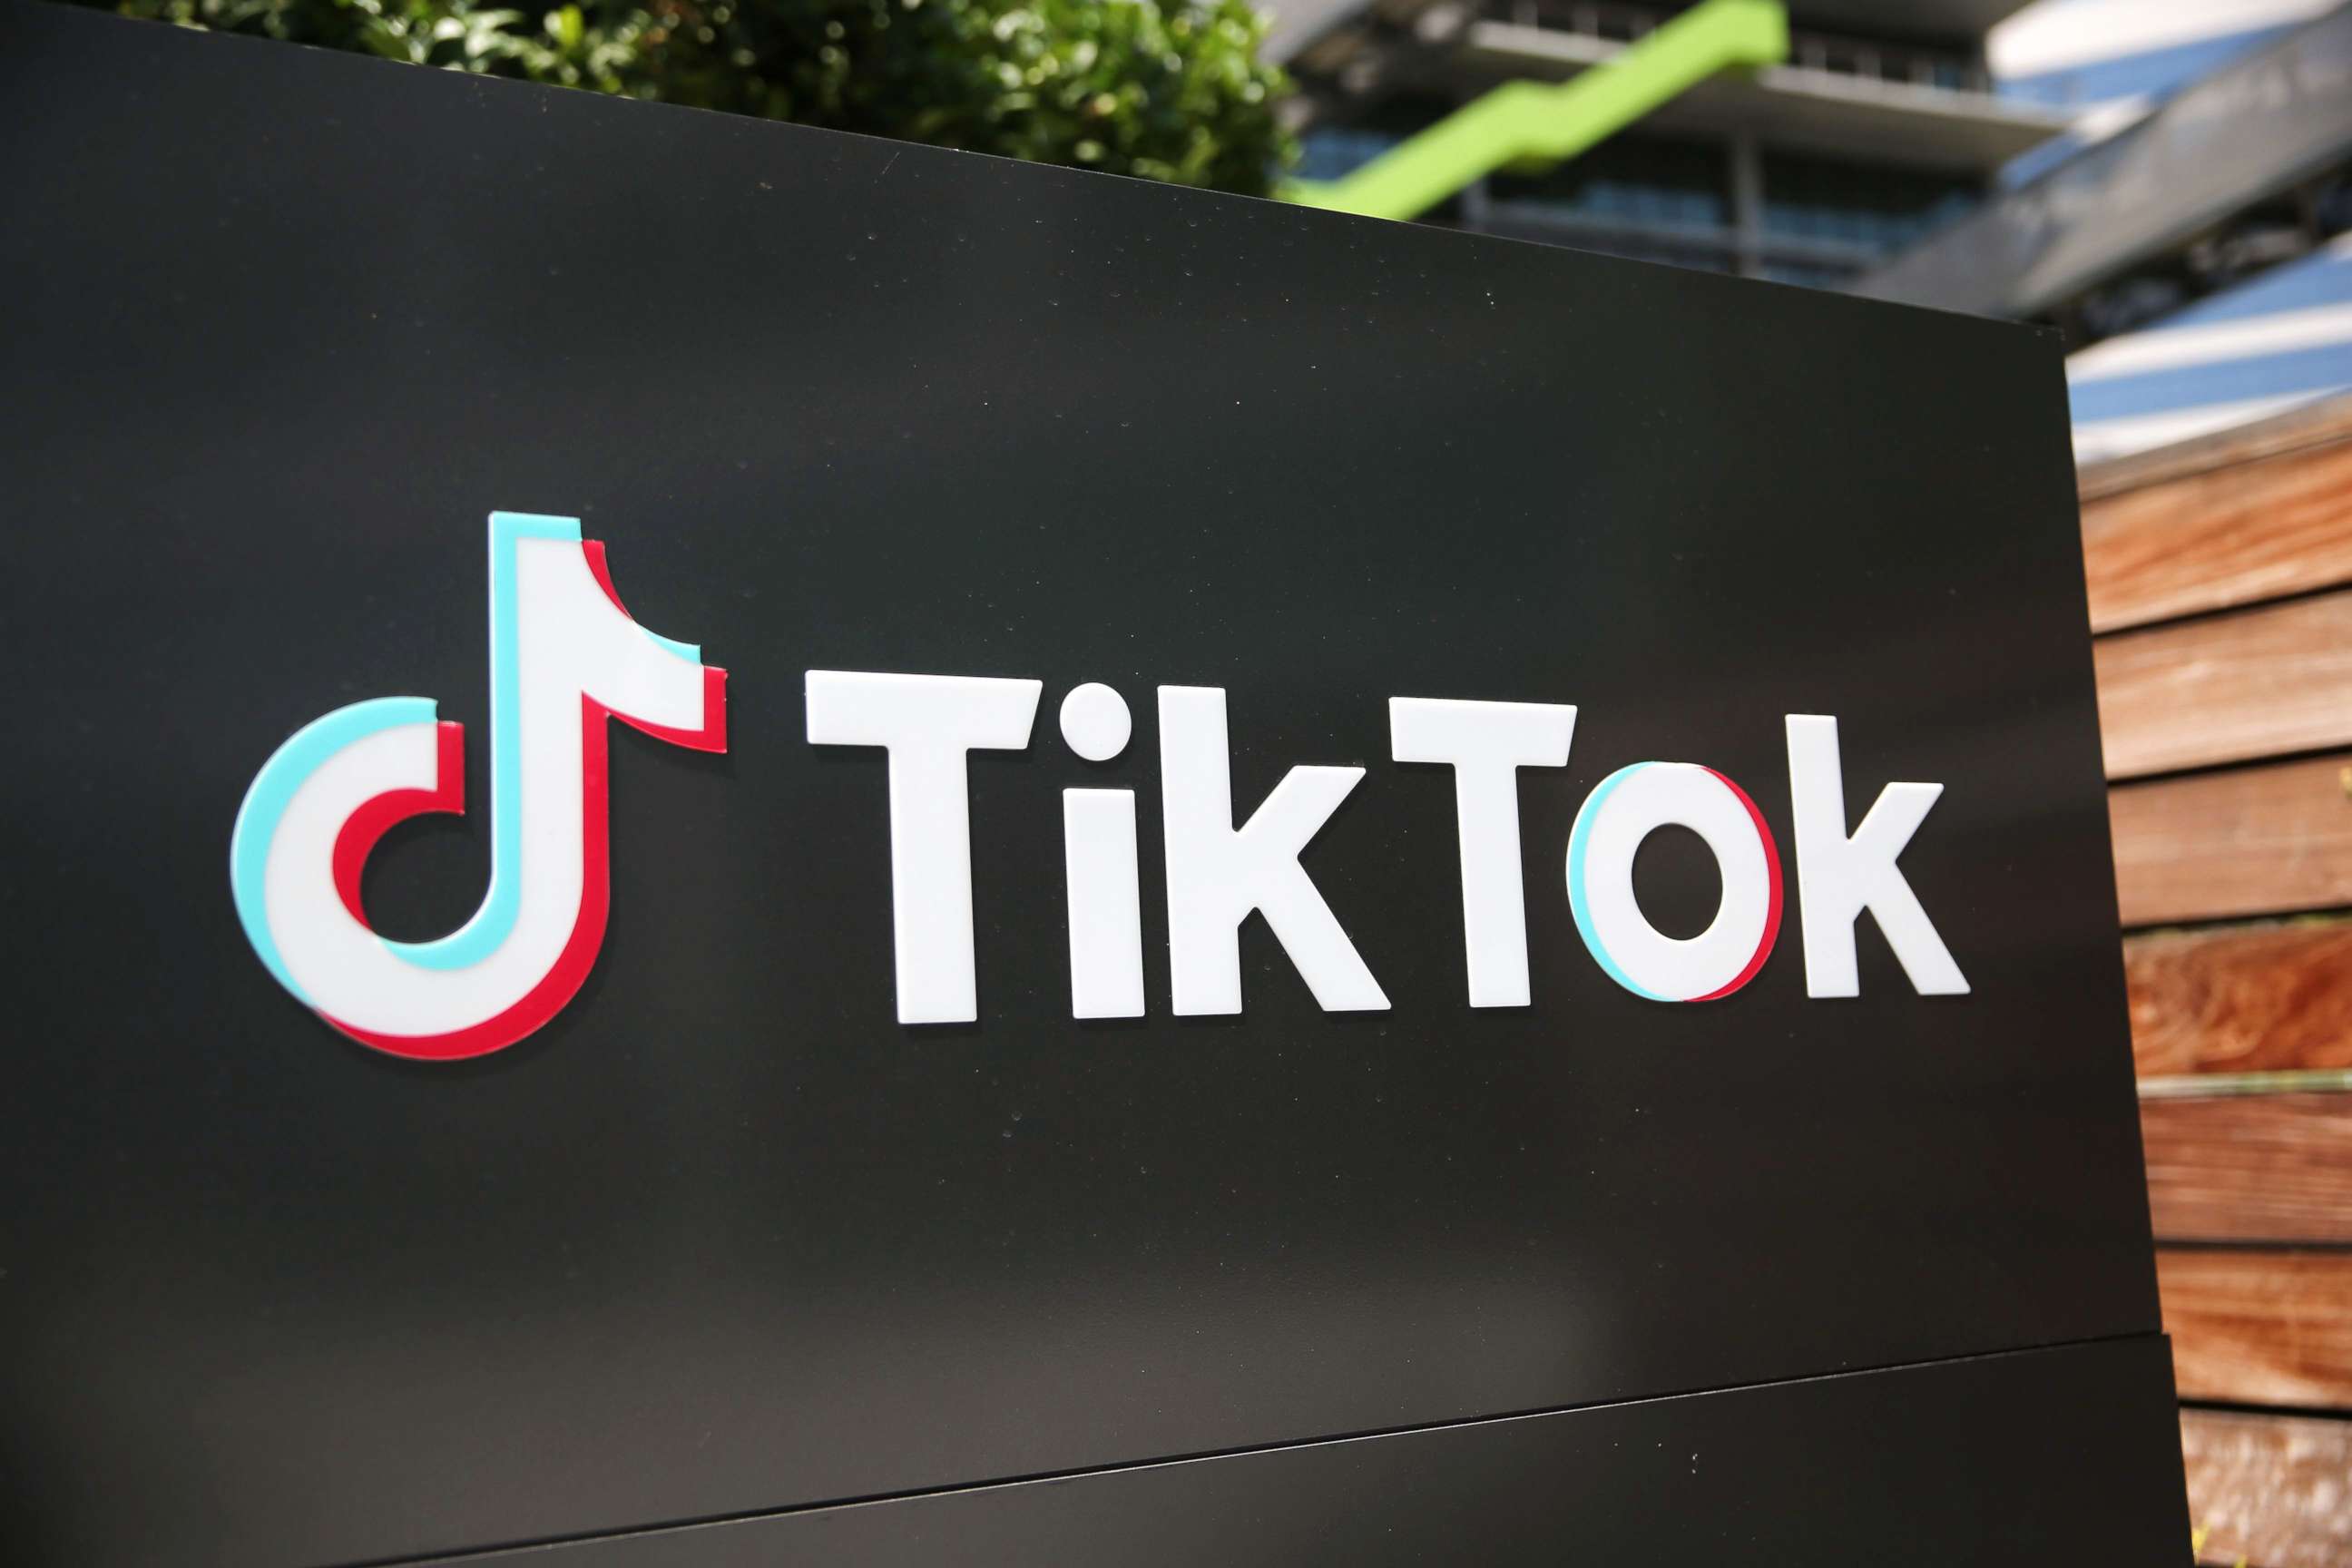 PHOTO: In this file photo taken on Aug. 27, 2020, the TikTok logo is displayed outside a TikTok office on in Culver City, Calif.